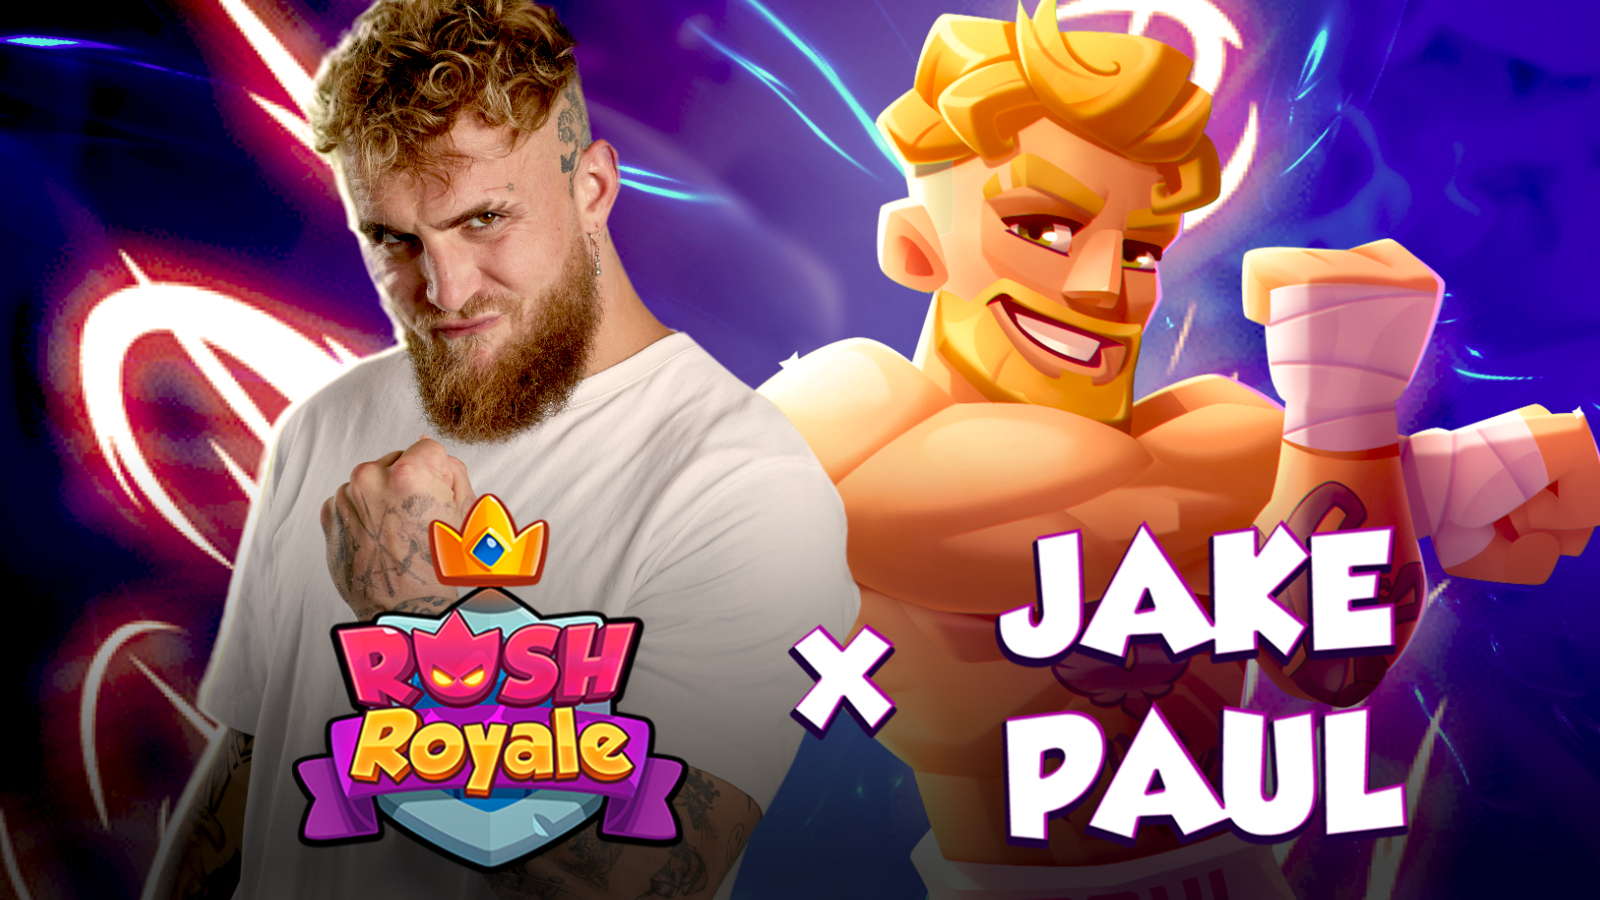 Jake Paul “honored” to join Rush Royale as unlockable hero character ...